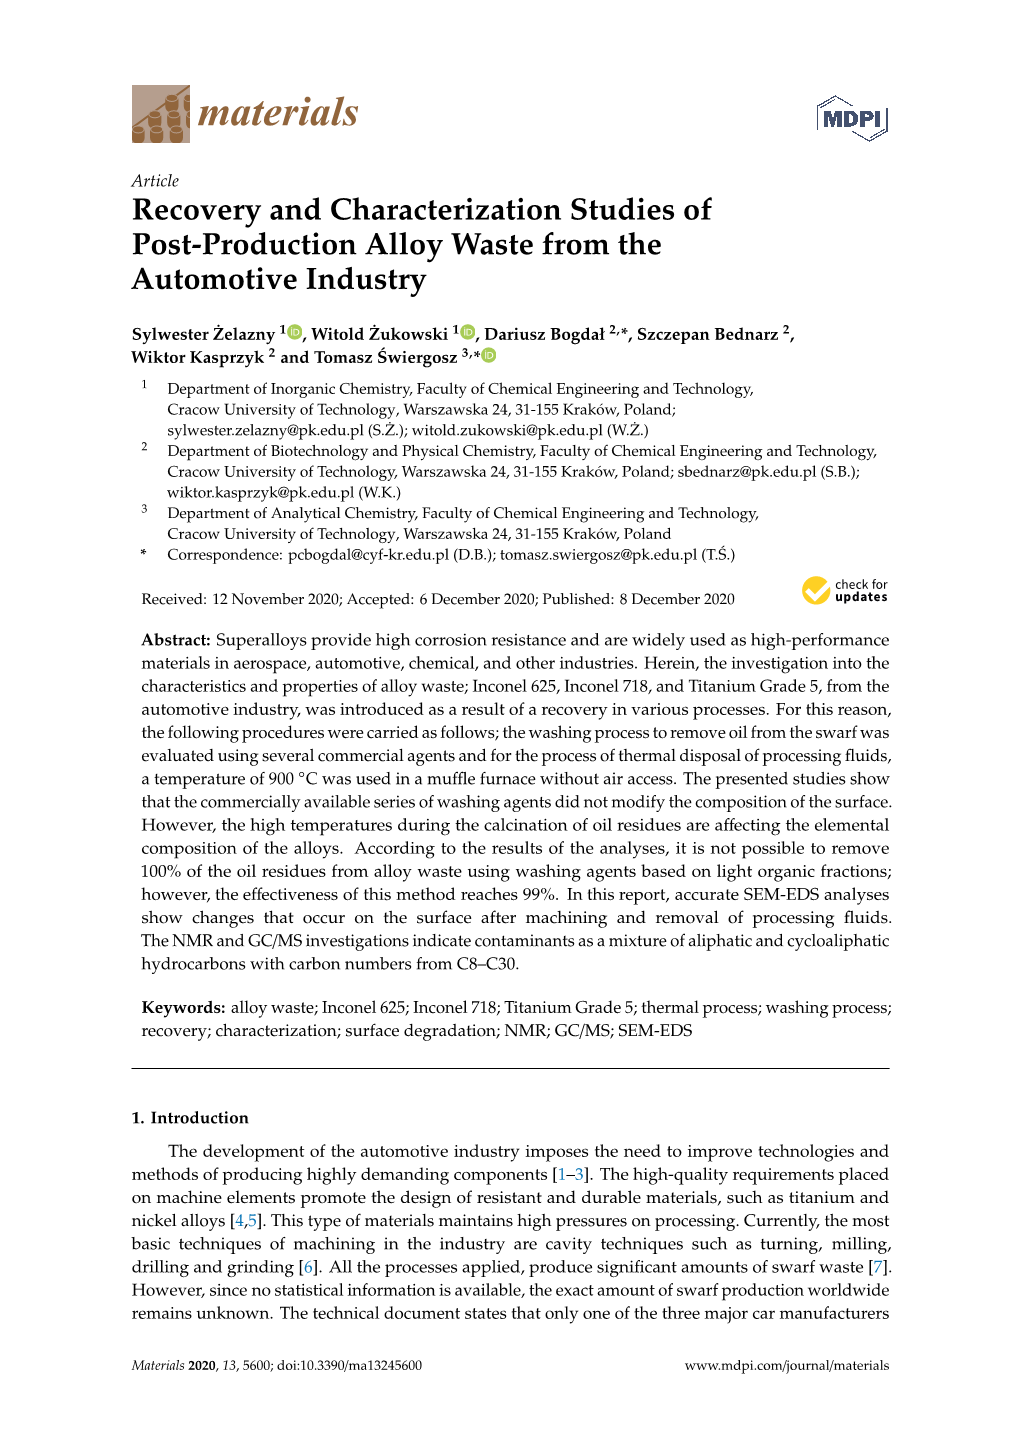 Recovery and Characterization Studies of Post-Production Alloy Waste from the Automotive Industry